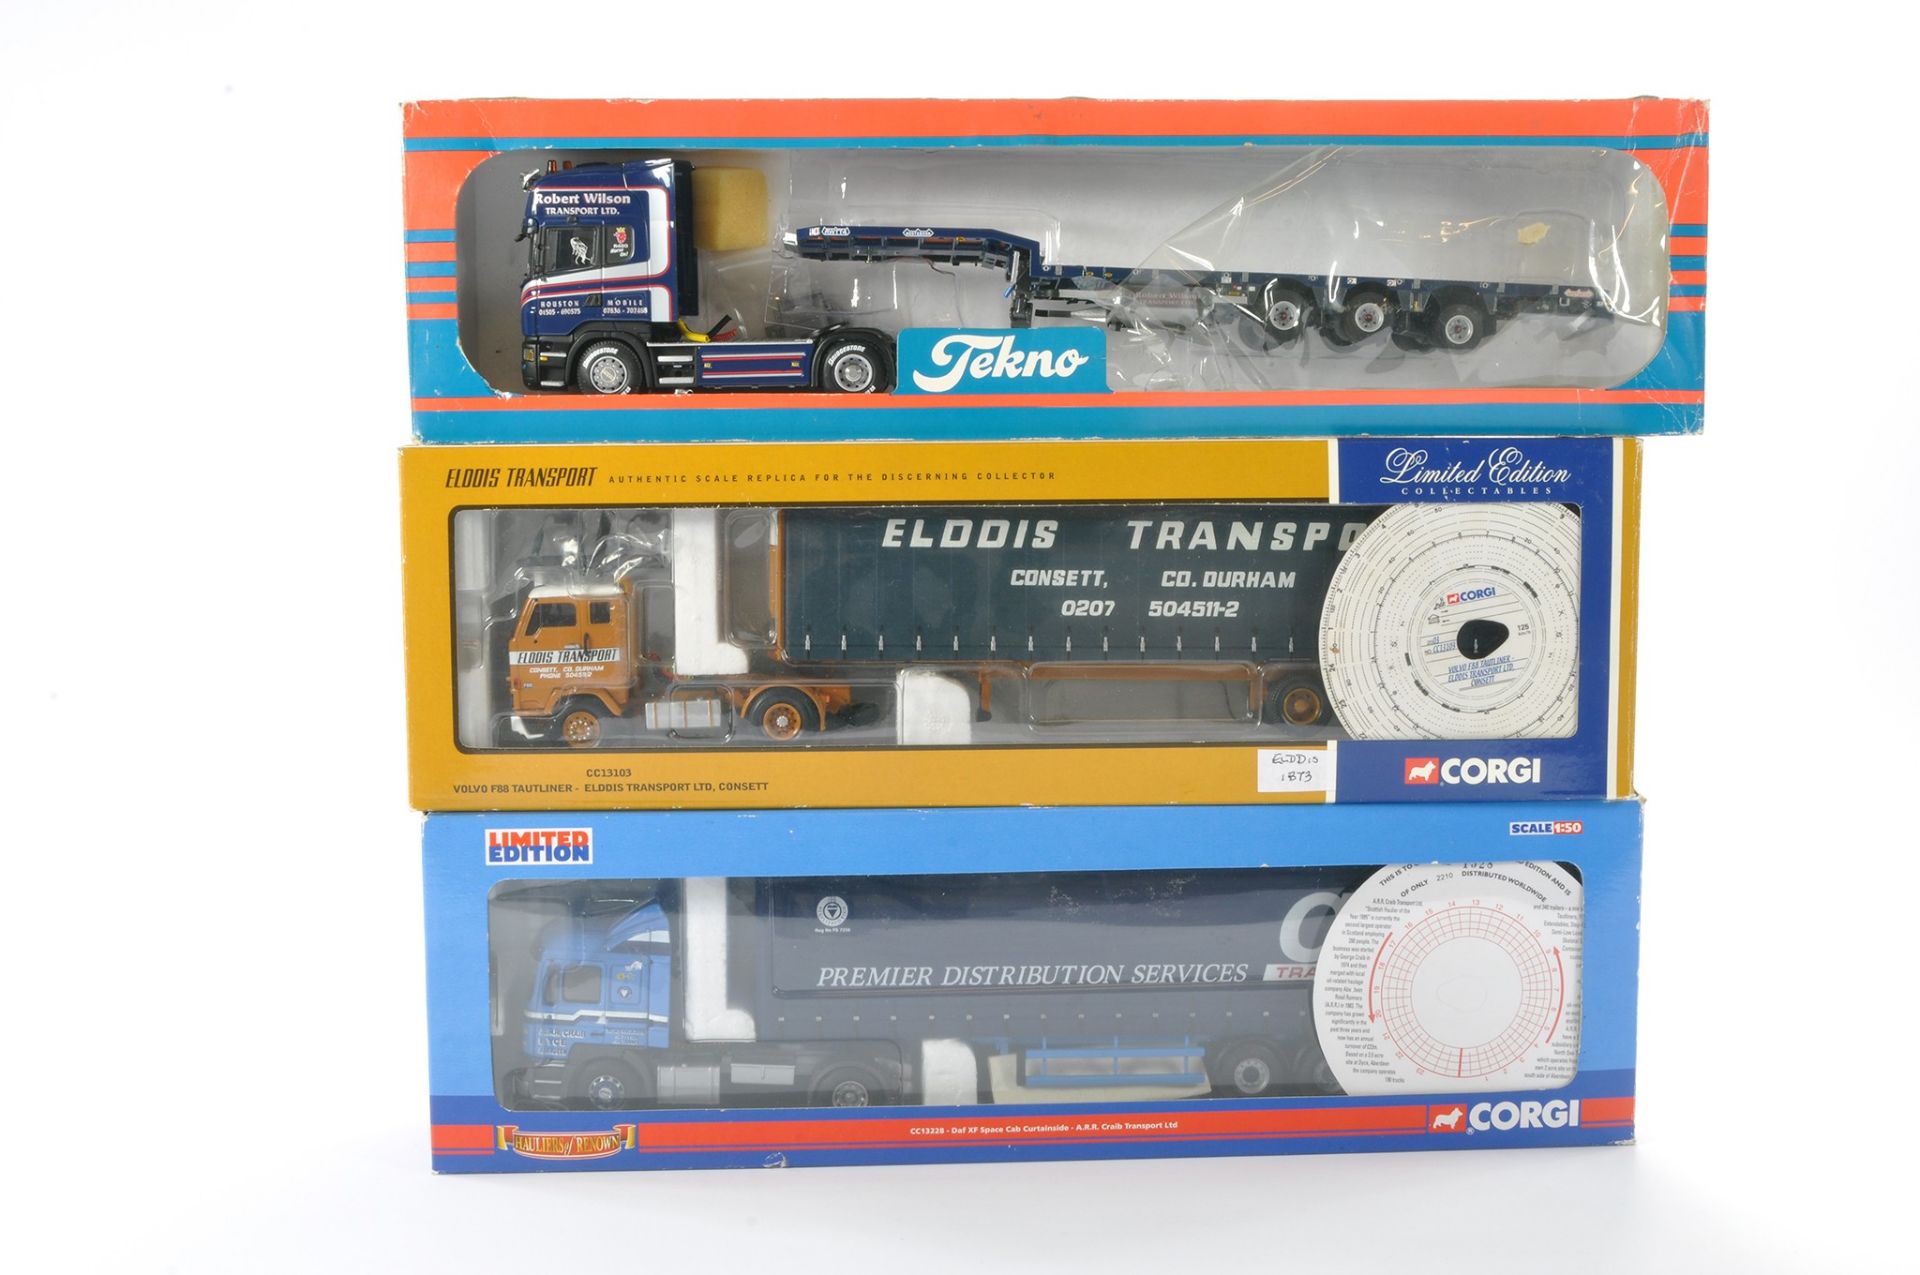 Corgi Model Truck Issue comprising No. CC13228 Scania Daf XF Space Cab Curtainside in the livery